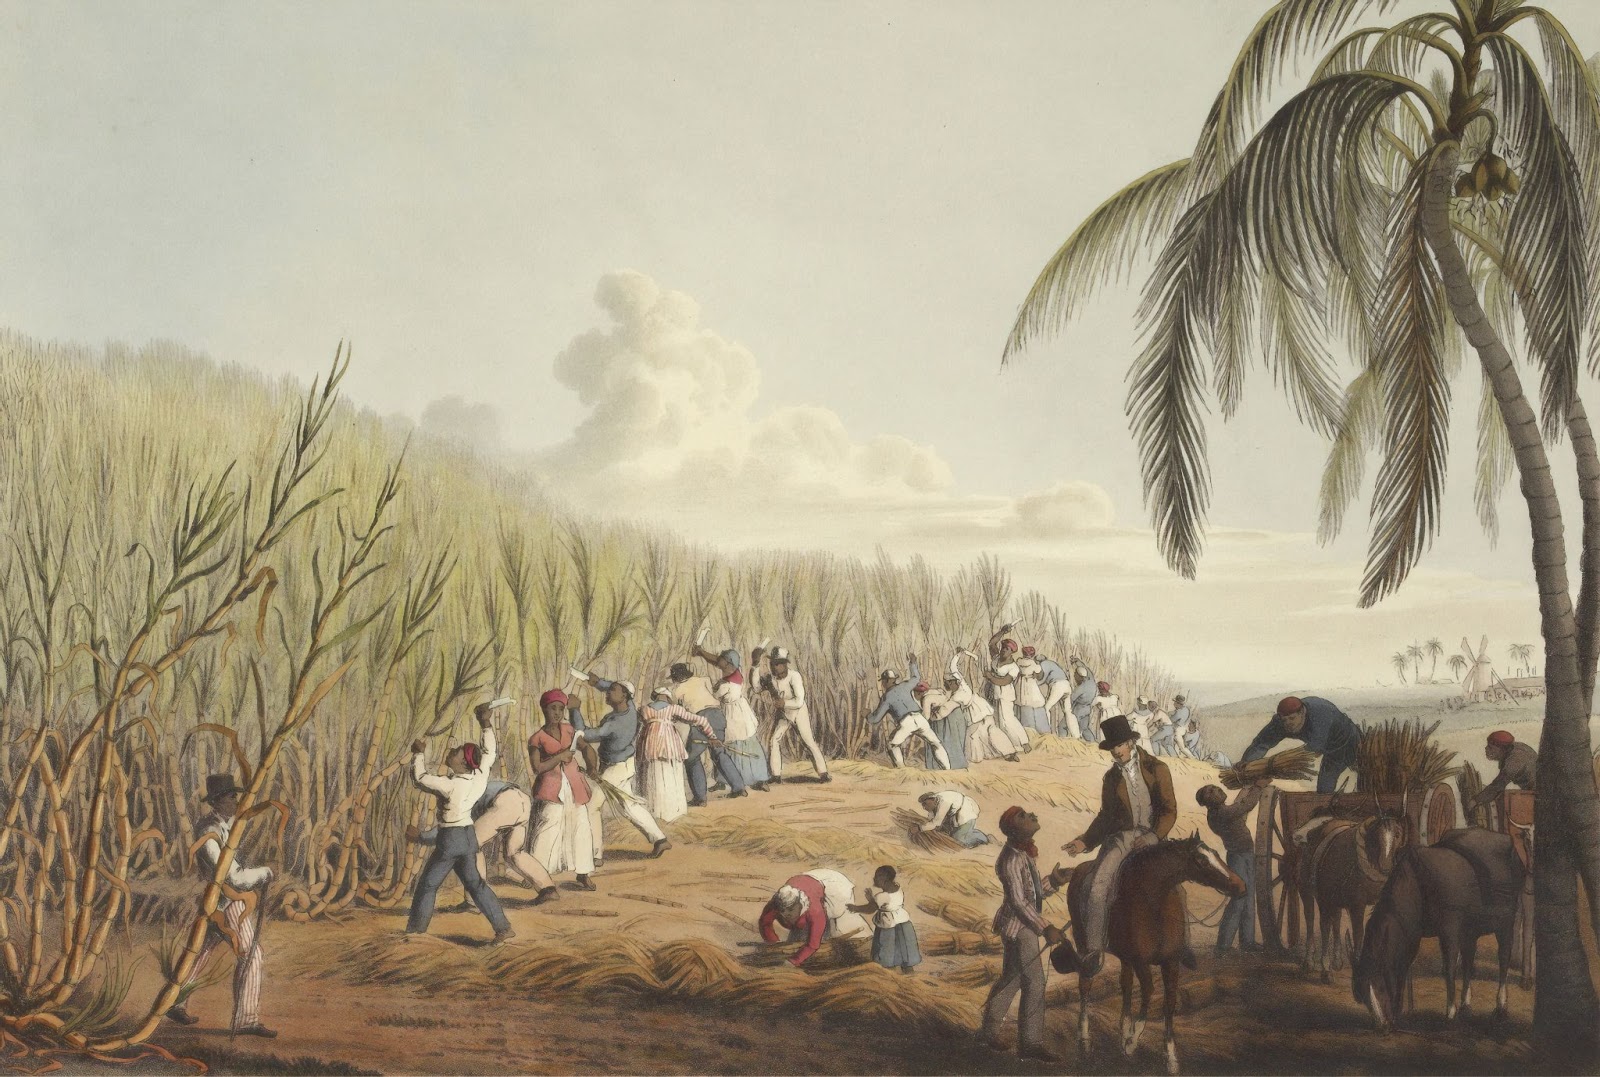 Slavery formed a cornerstone of the British Empire in the 18th century